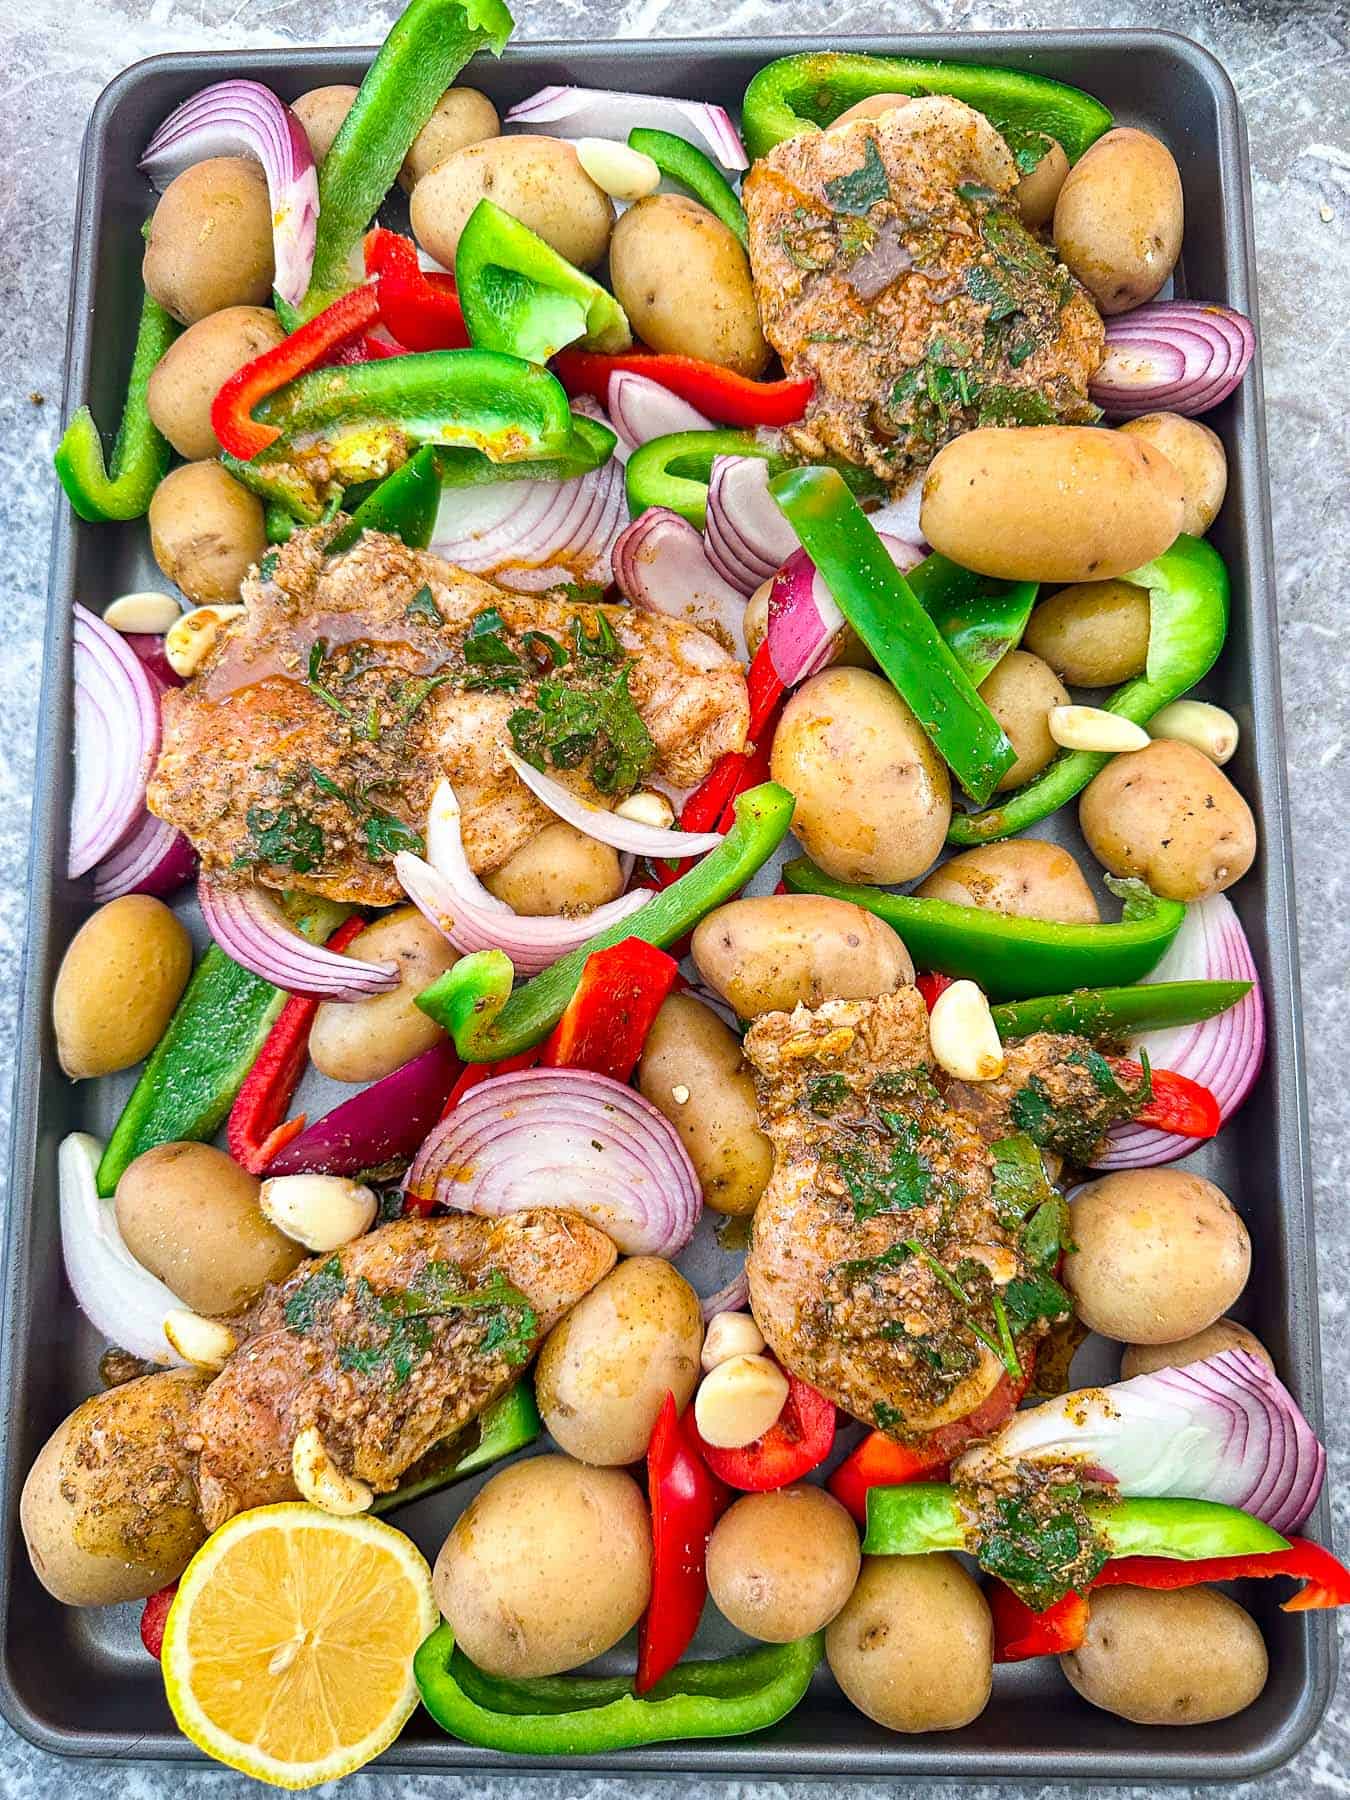 Sheet pan with chicken and veggies like potatoes, bell peppers, onions etc ready to bake.